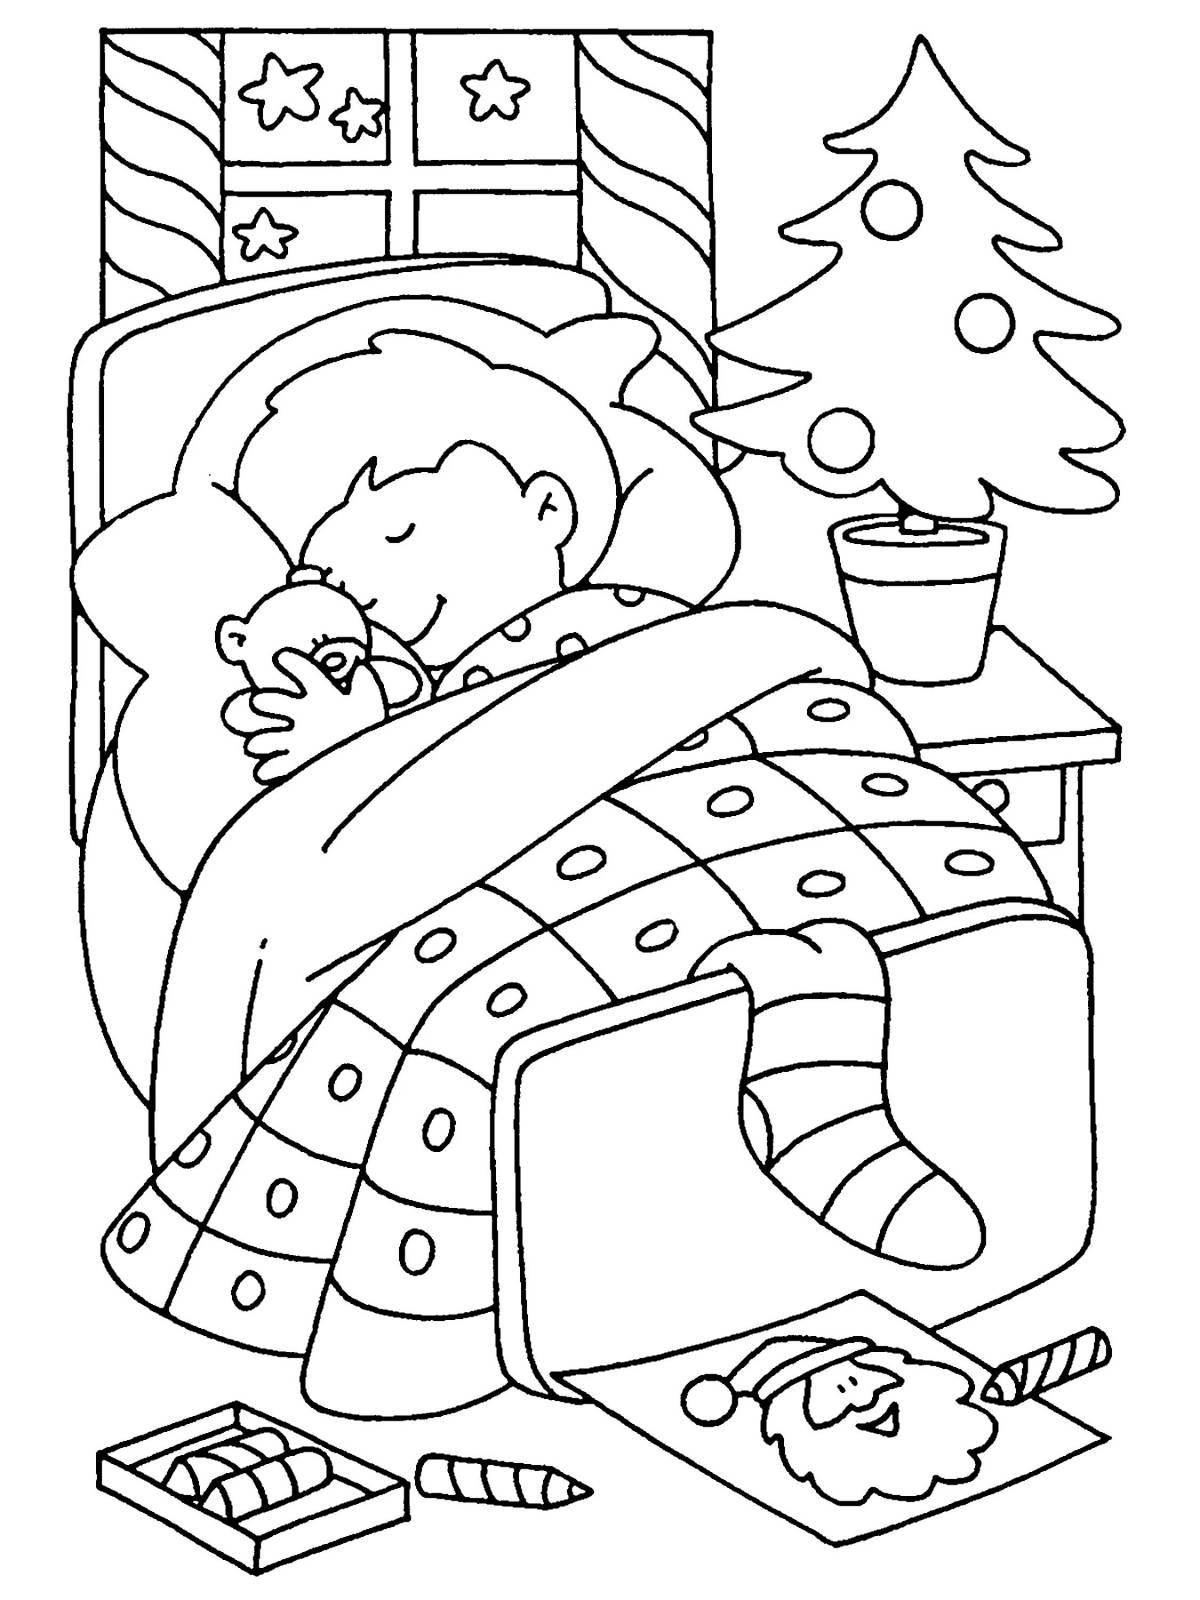 Fantastic night coloring for kids